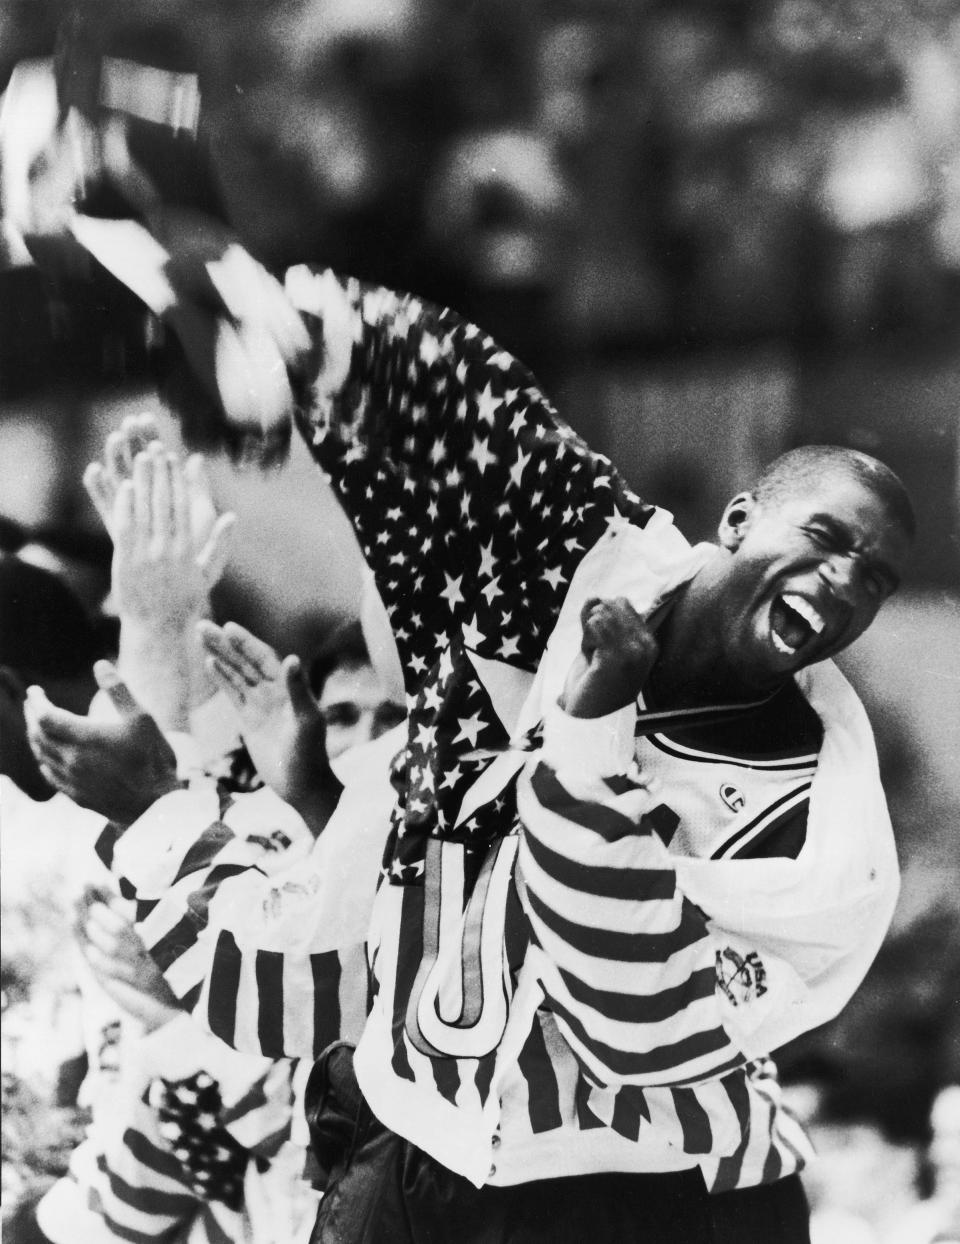 HOLD FOR OBIT-FILE - In this Aug. 8, 1992 photo taken by Associated Press photographer Leonard Ignelzi shows U.S. basketball player Earvin Magic Johnson screams as he lifts the American flag just after receiving his gold medal in Barcelona, Spain. Ignelzi, whose knack for being in the right place at the right time produced breathtaking images of Hall of Fame sports figures, life along the U.S.-Mexico border, devastating wildfires and numerous other major news events over nearly four decades as a photographer for The Associated Press in San Diego, has died. He was 74. (AP Photo/Lenny Ignelzi)